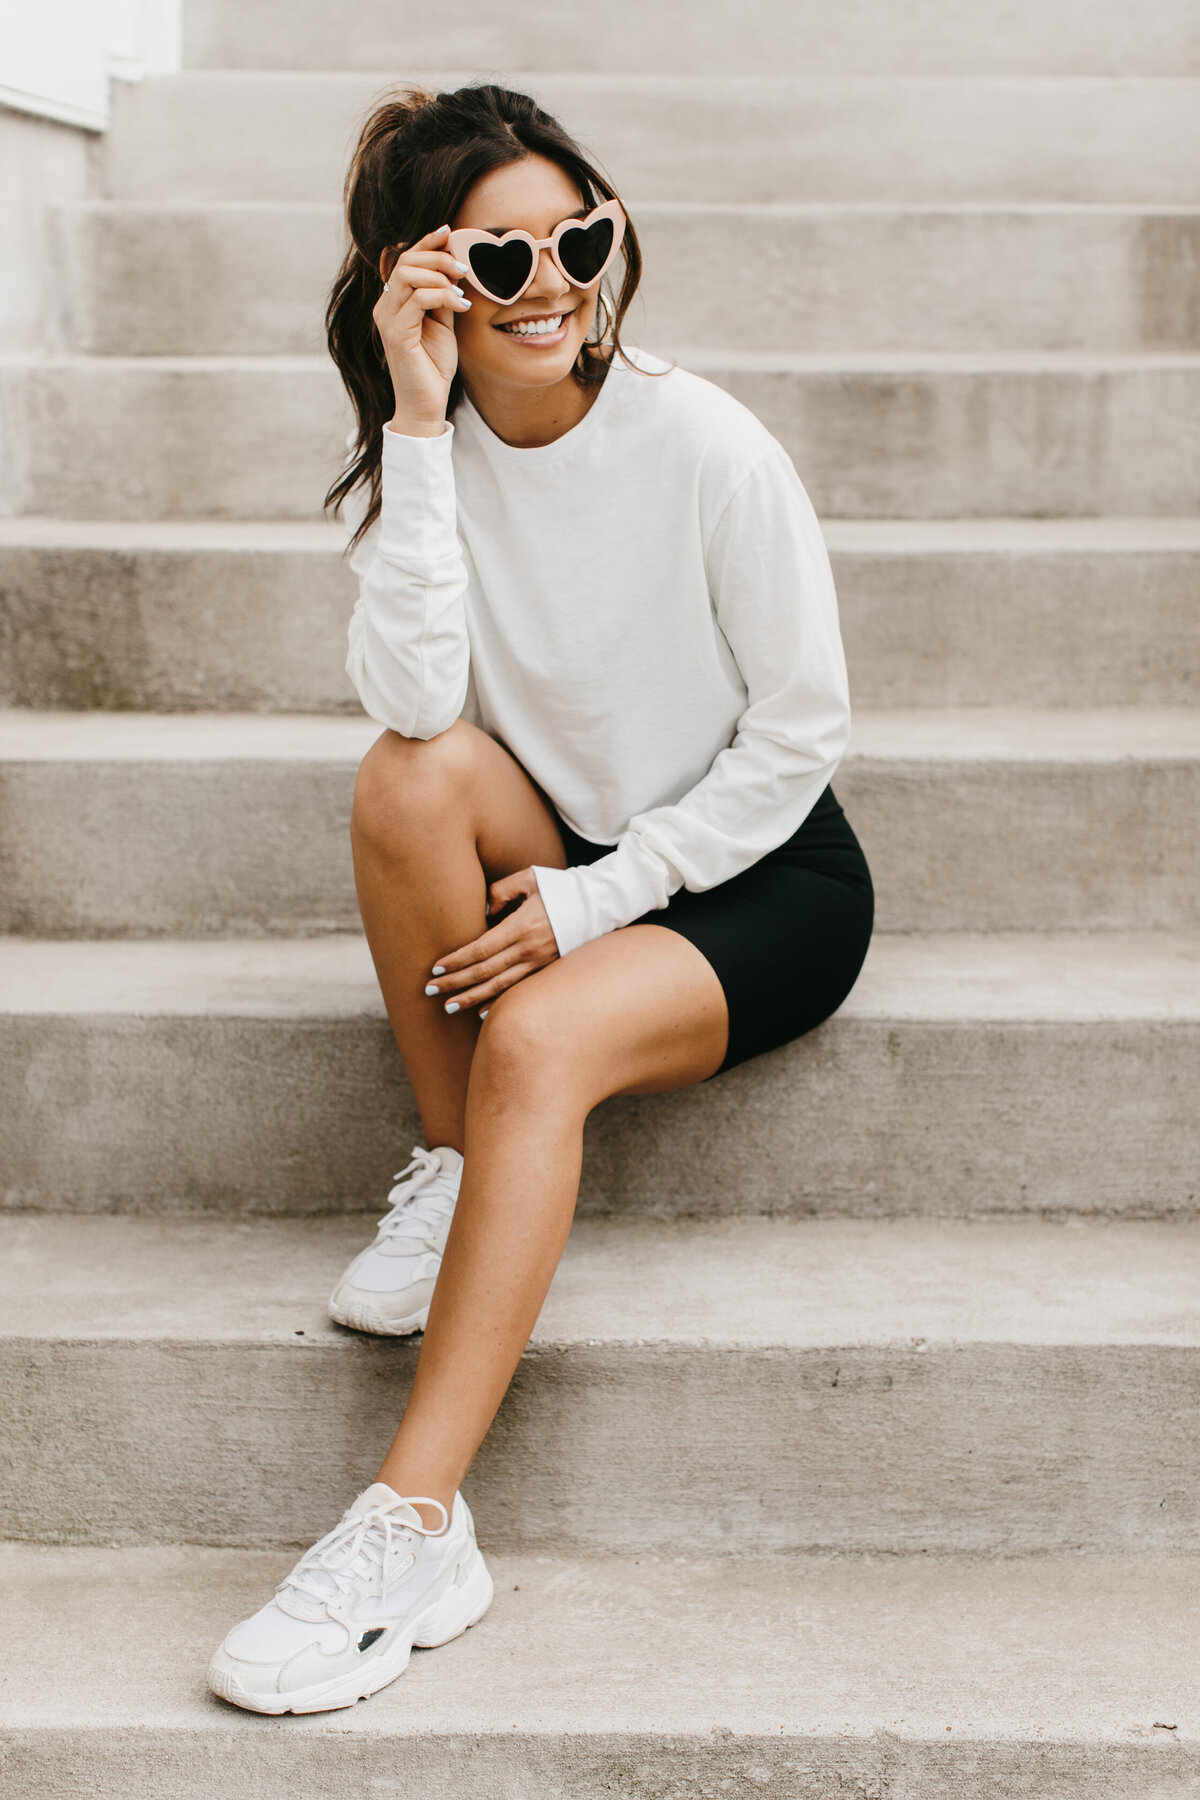 model sitting on stairs in sweatshirt and heart shaped sunglasses